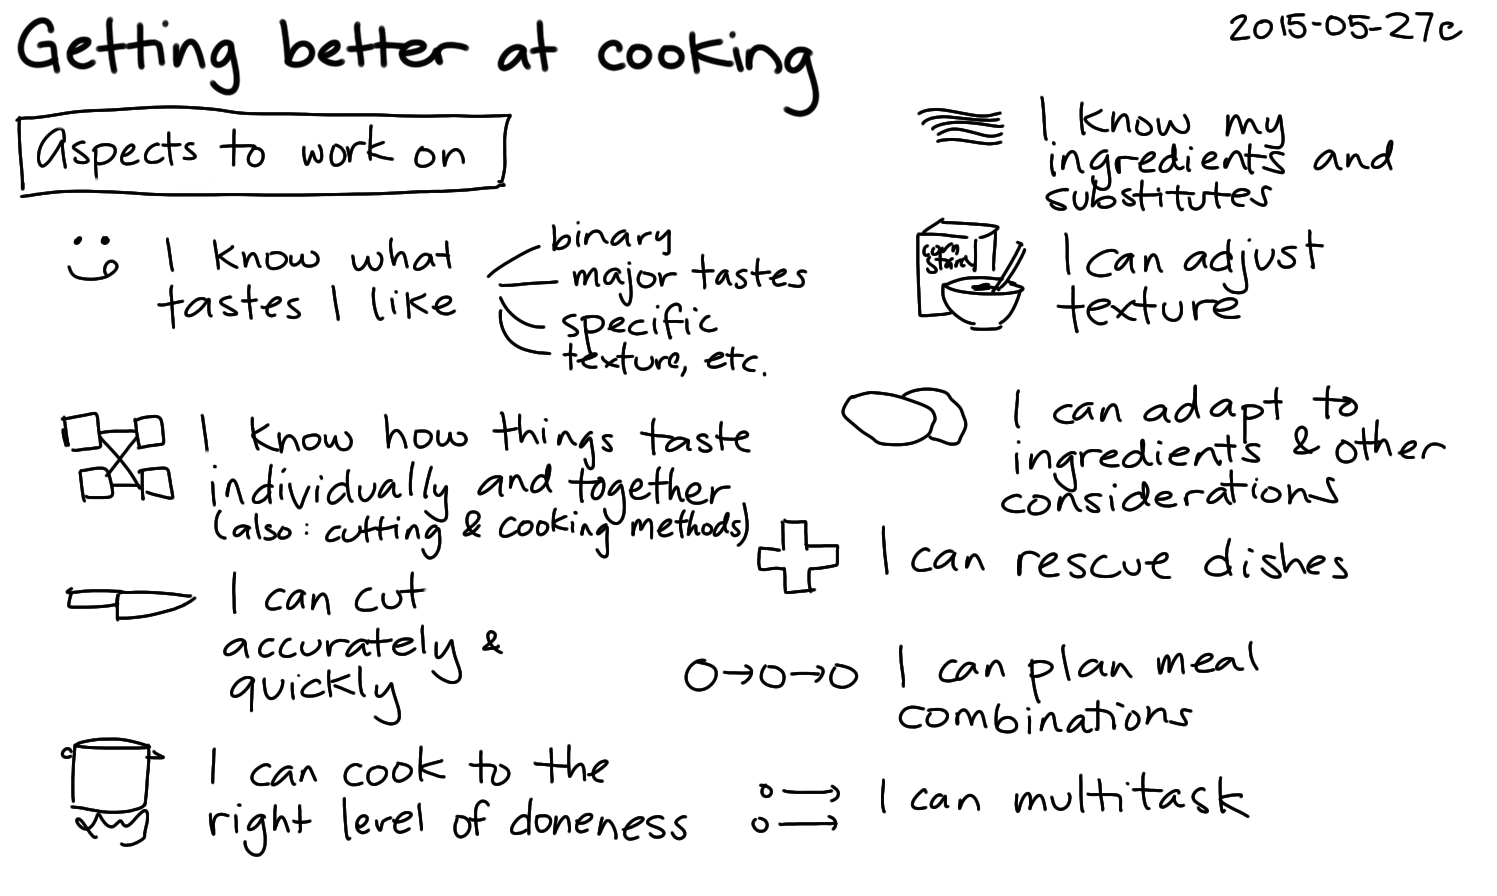 2015-05-27c Getting better at cooking -- index card #kaizen #cooking #learning.png